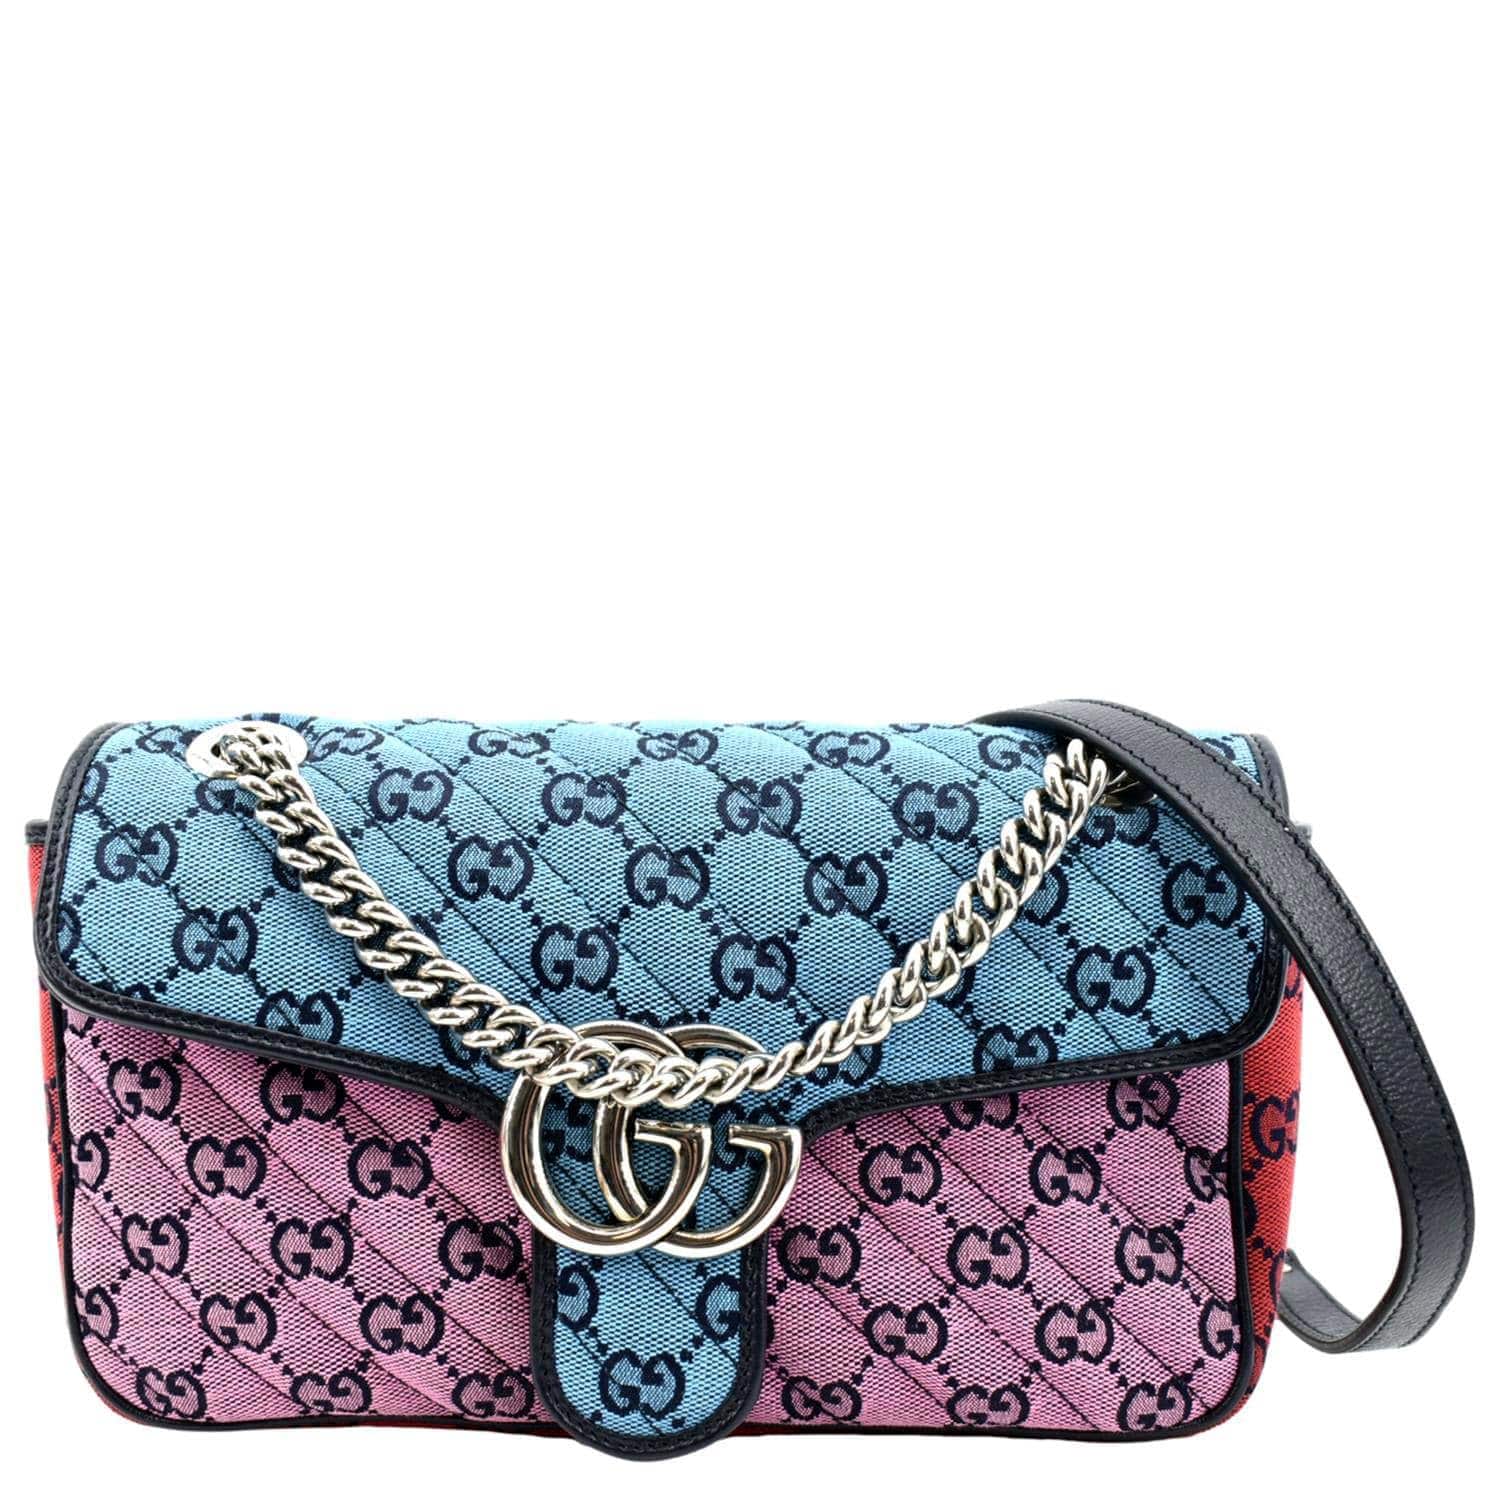 Gg marmont leather crossbody bag Gucci Multicolour in Leather - 35730777